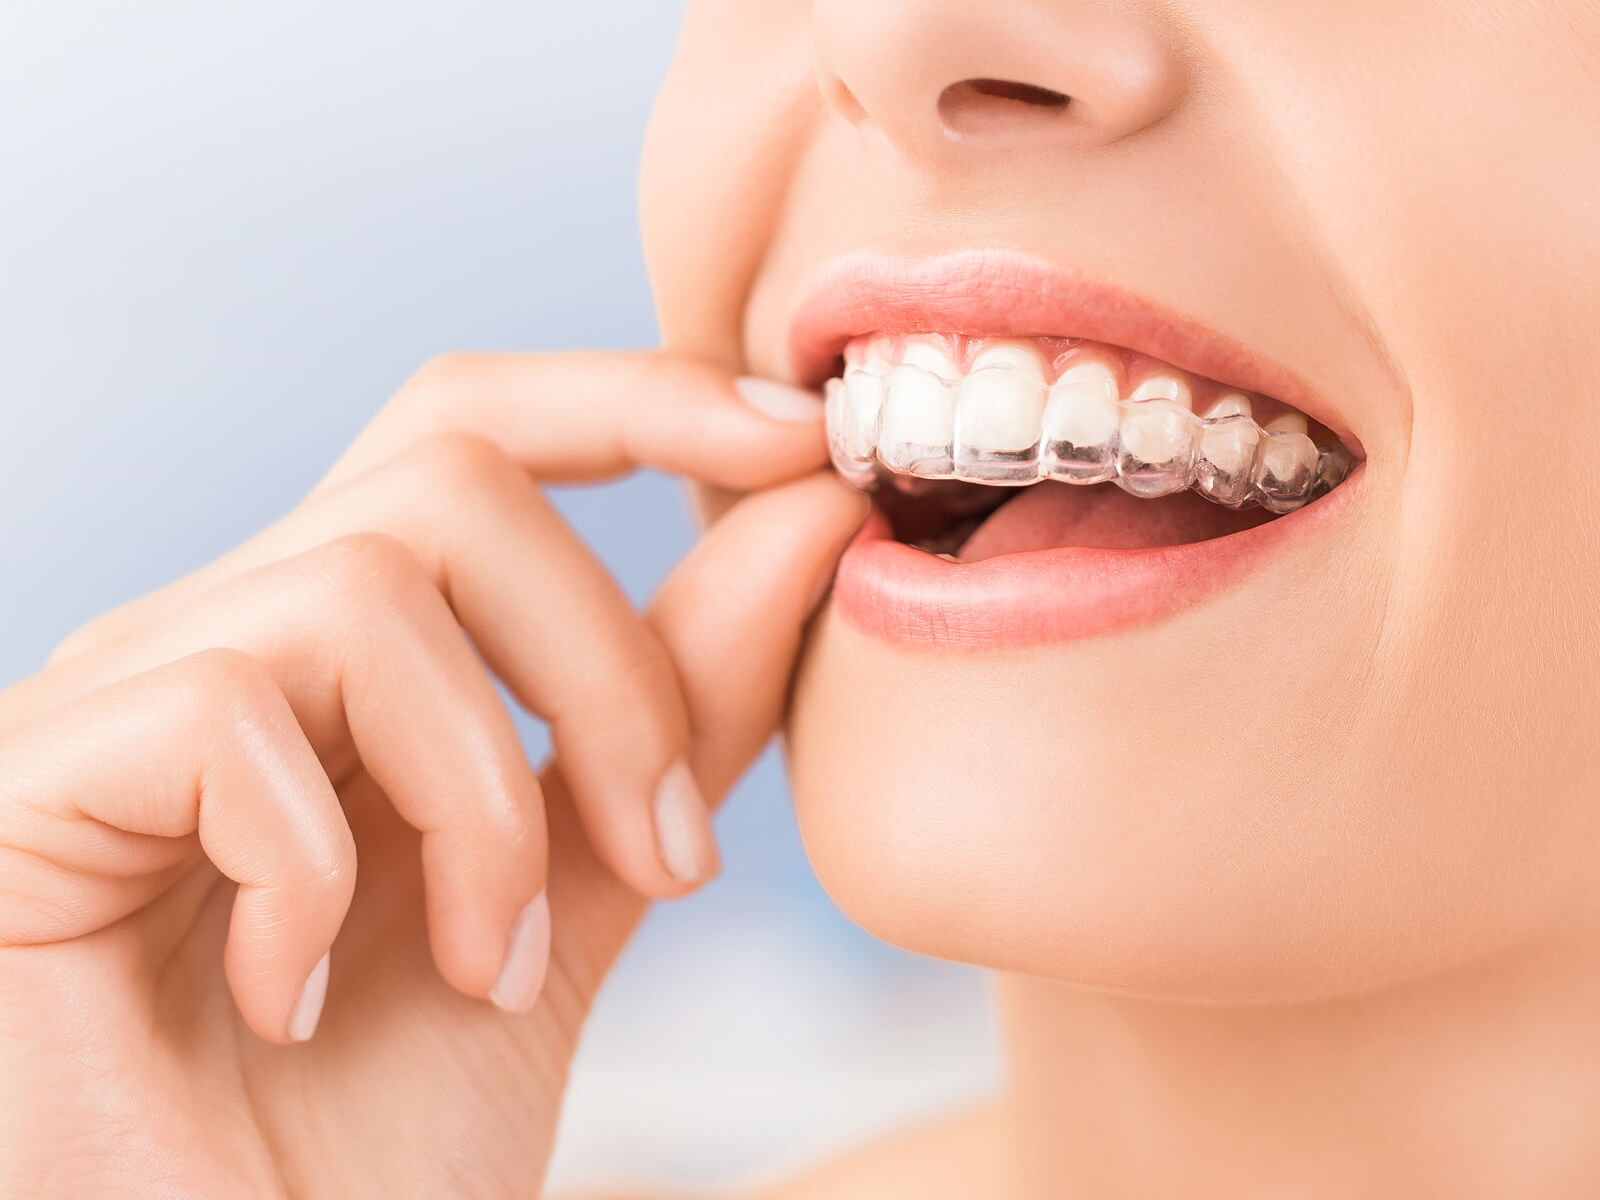 How long will 14 Invisalign trays take?